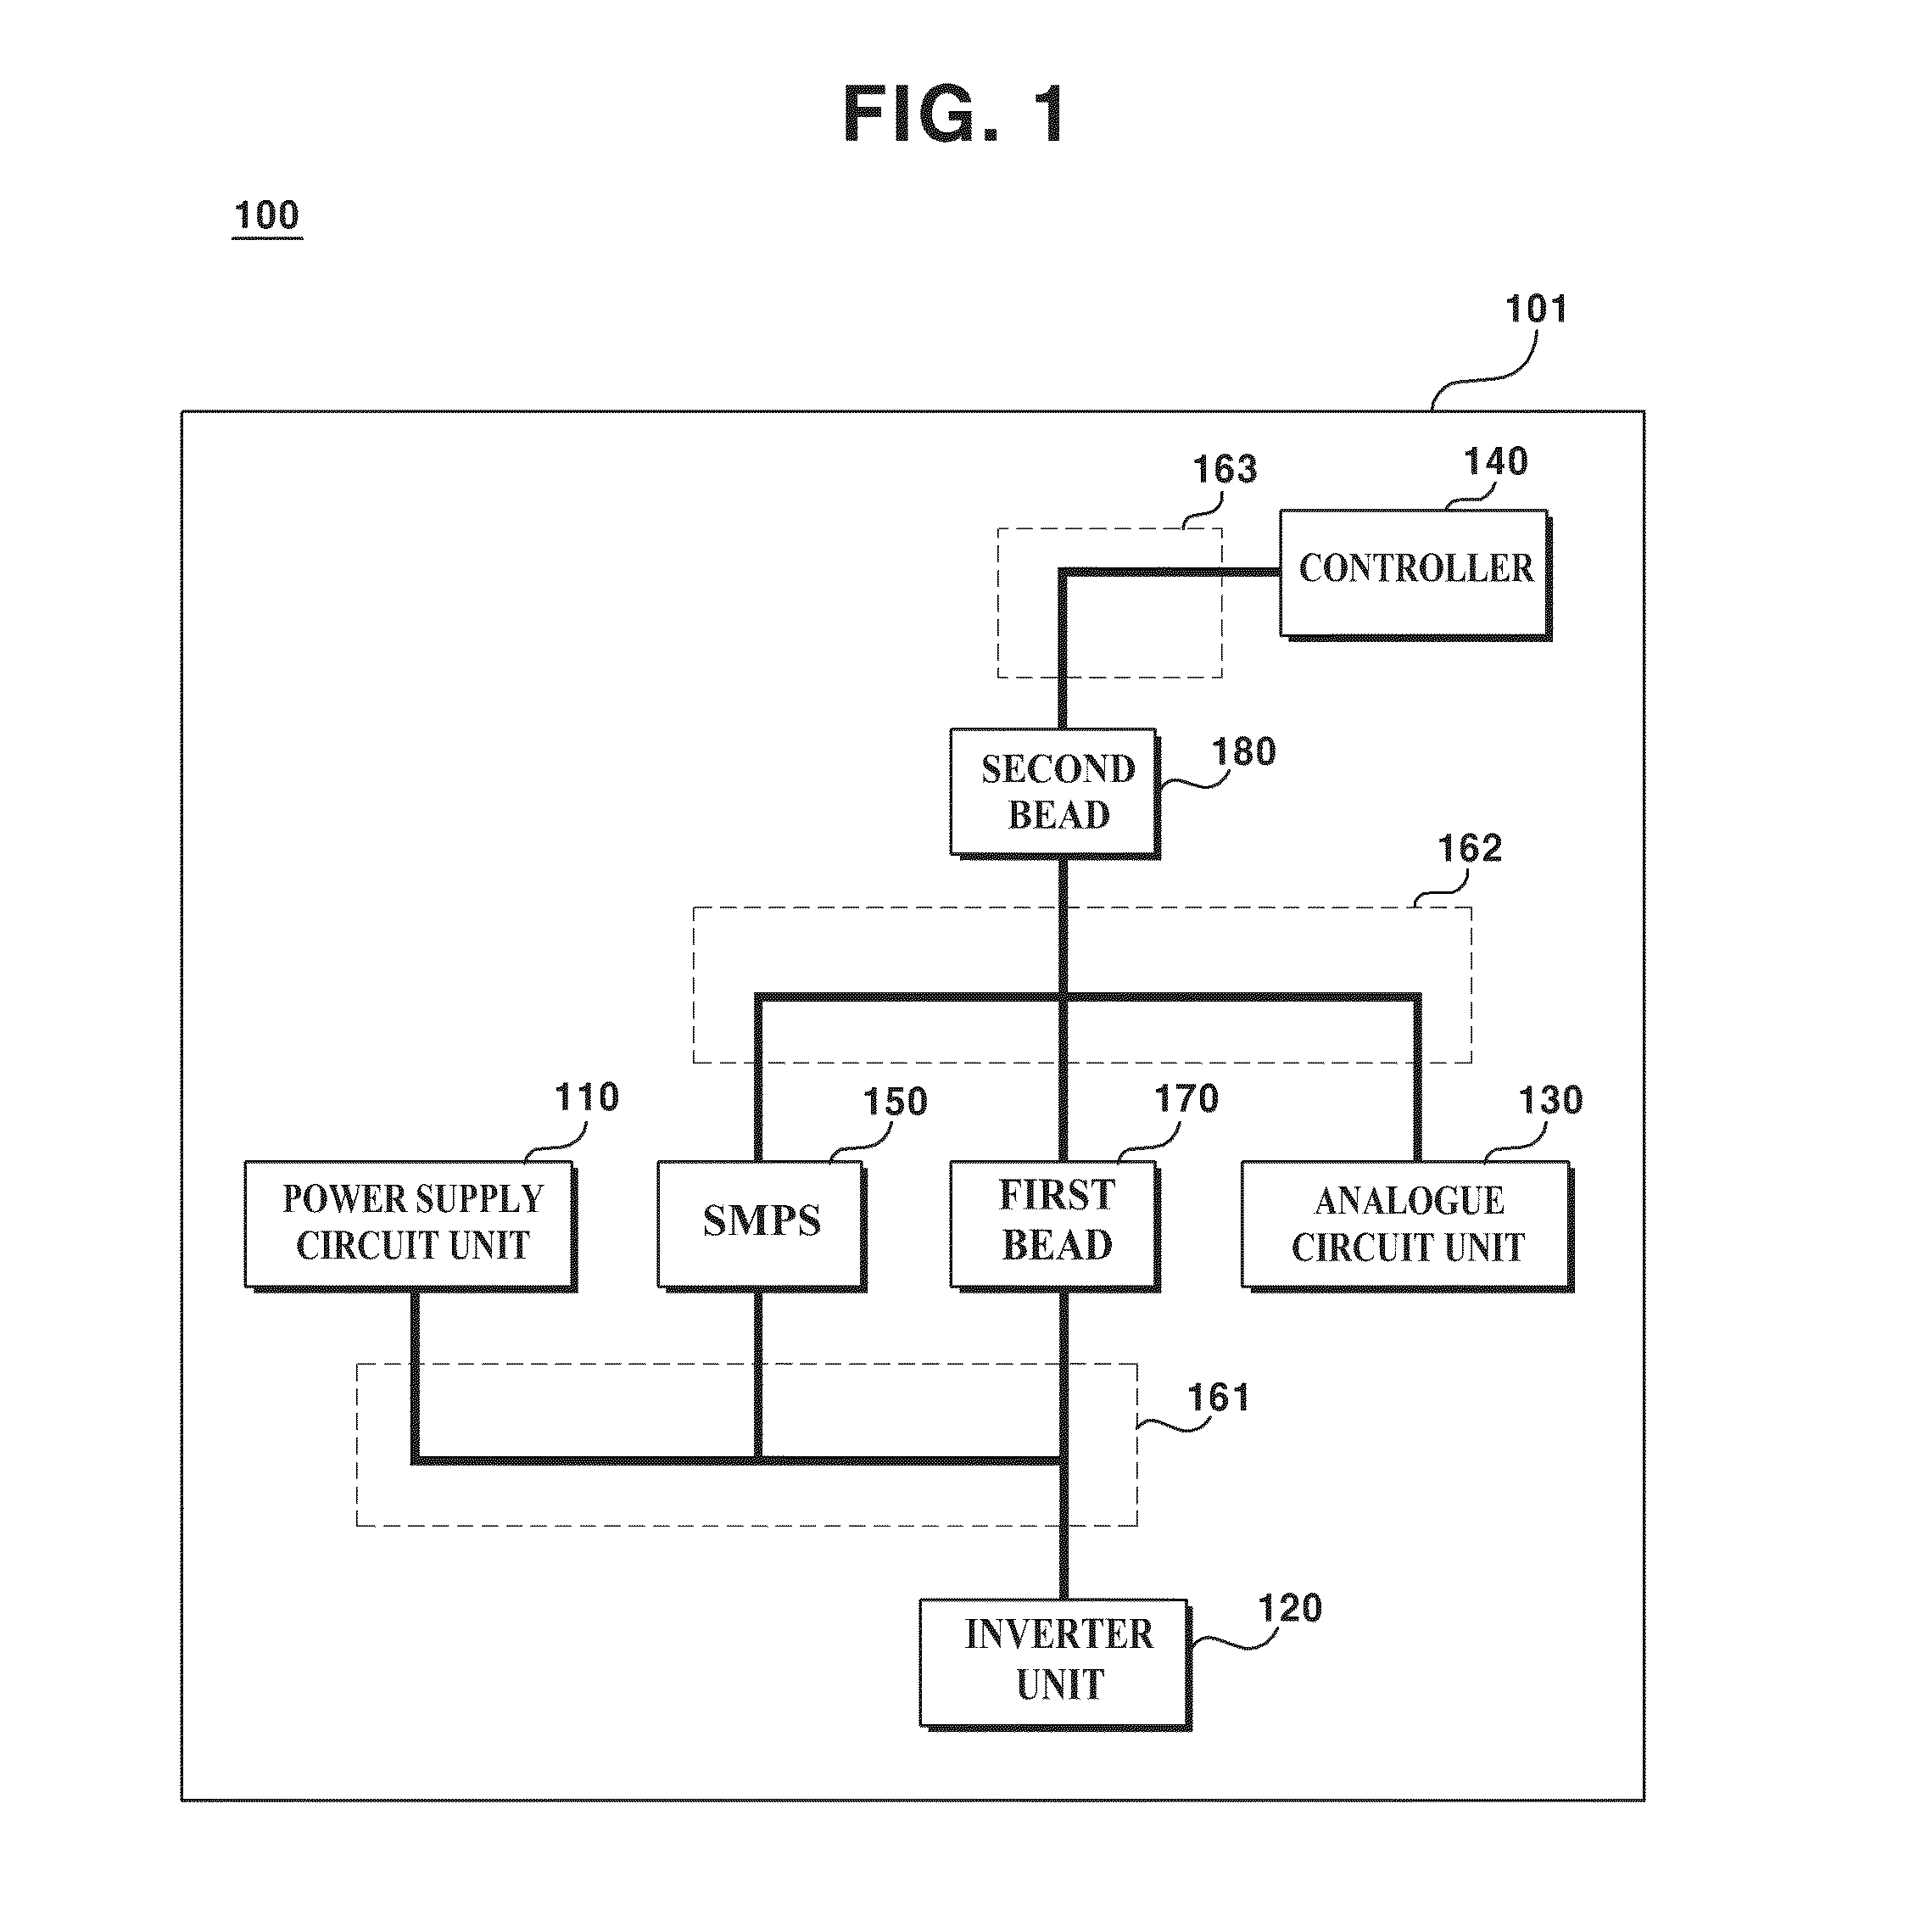 Inverter assembly without galvanic isolation